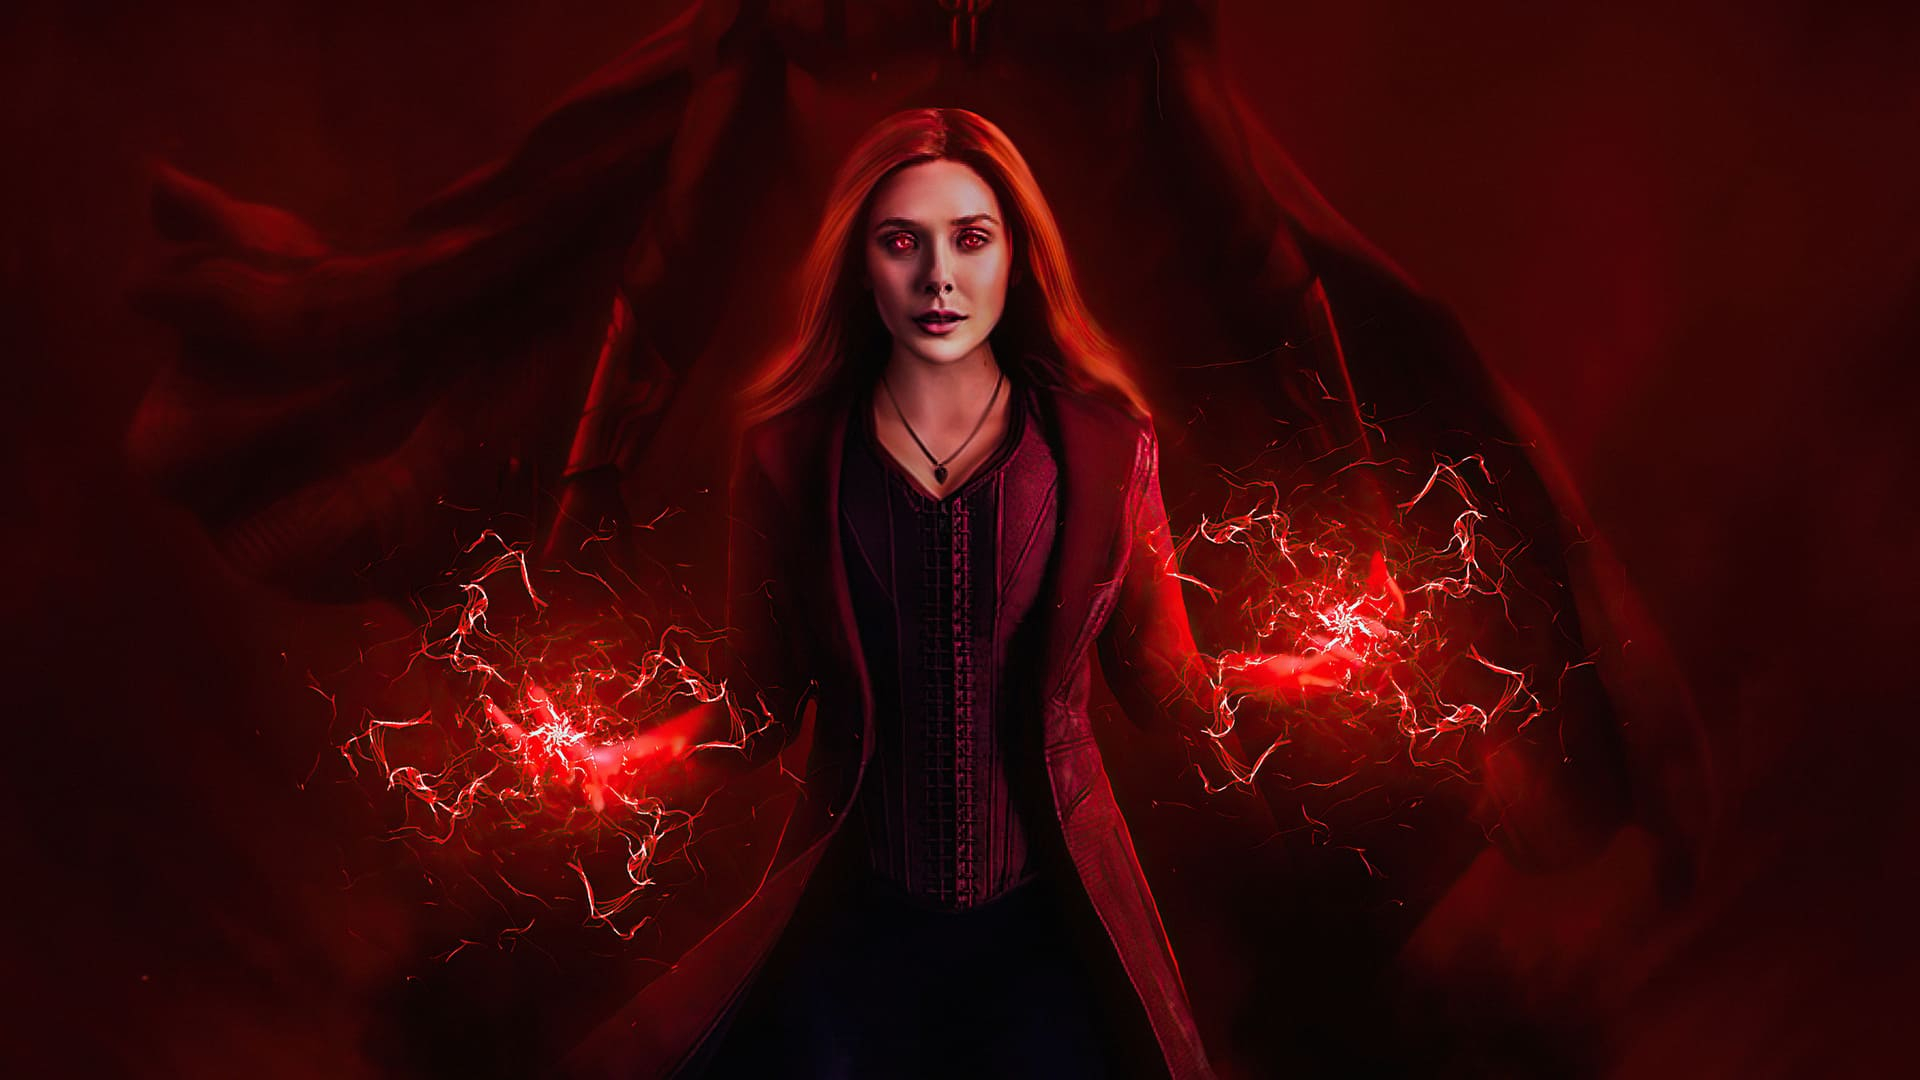 1920x1080 Scarlet Witch Wallpapers Top 35 Best Scarlet Witch Backgrounds Download